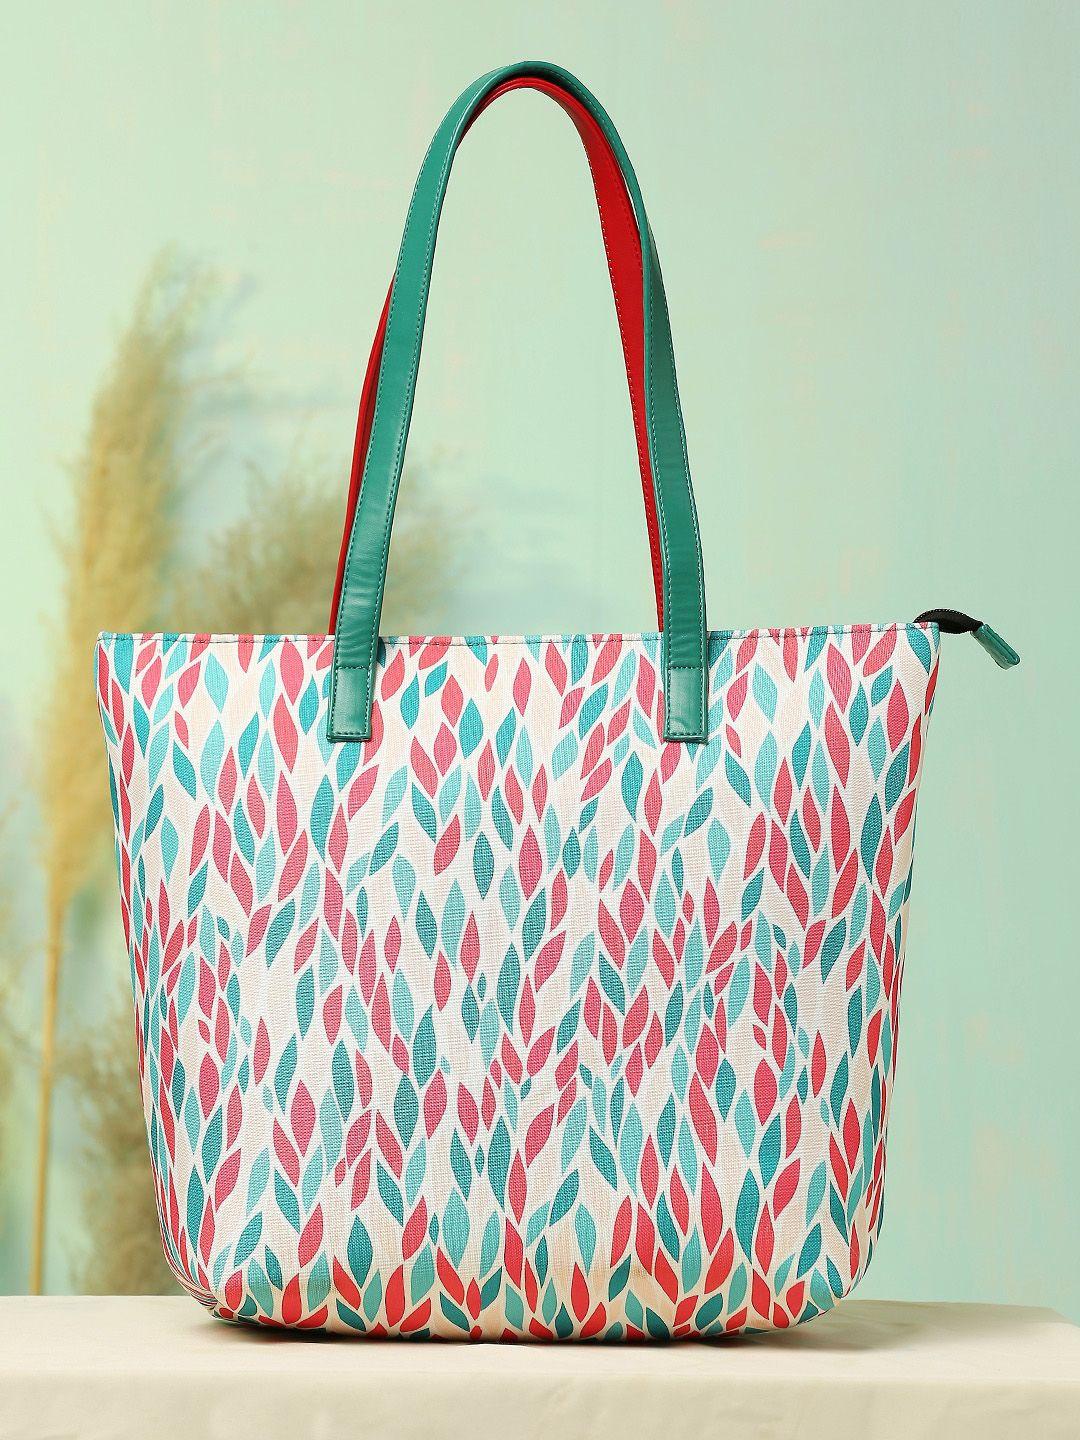 dressberry white floral printed oversized shopper tote bag